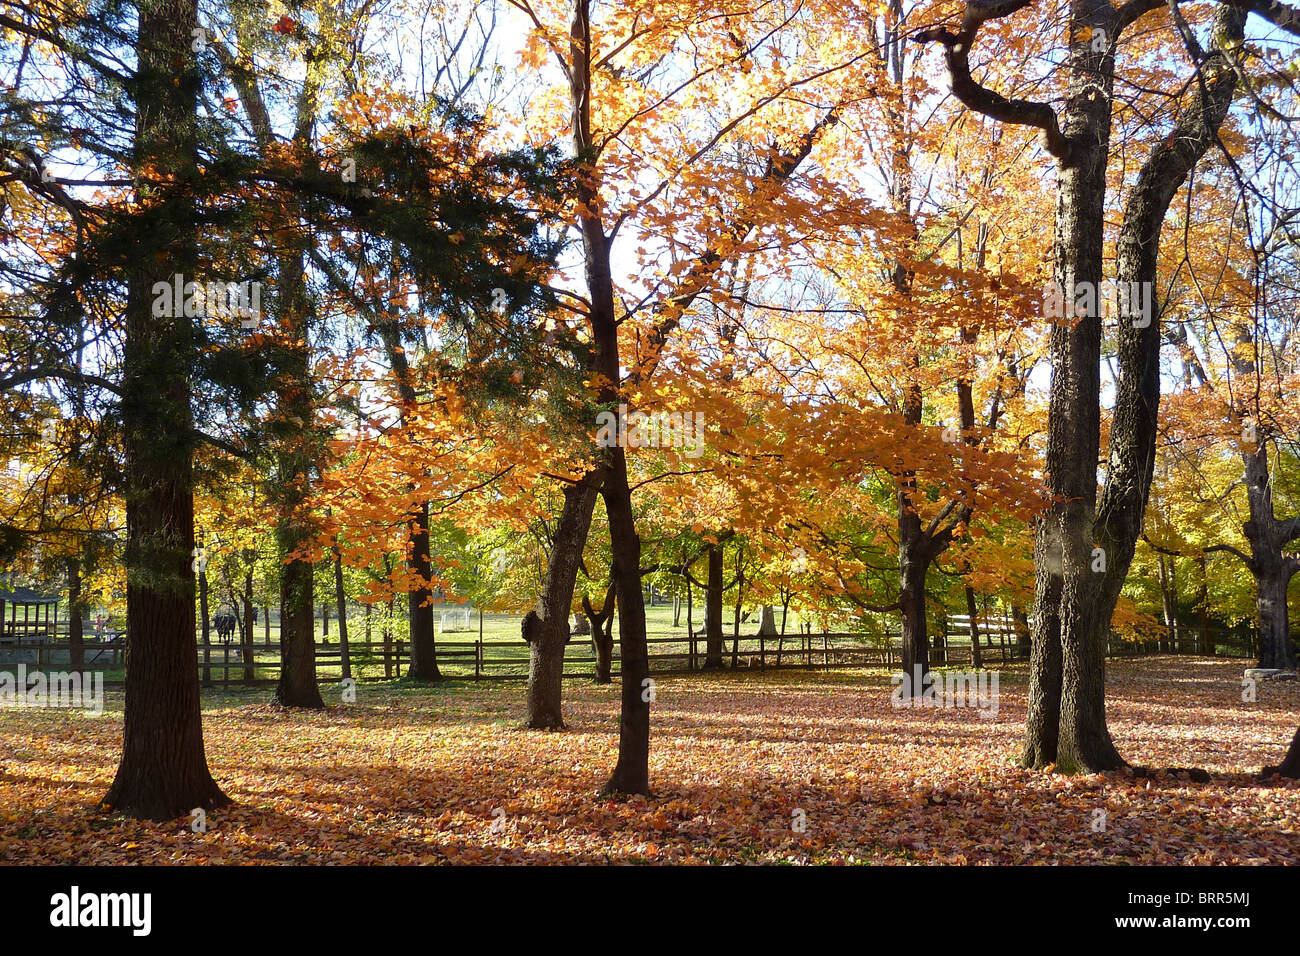 The Farm at the Nashville Zoo with trees in autumn colours Stock Photo